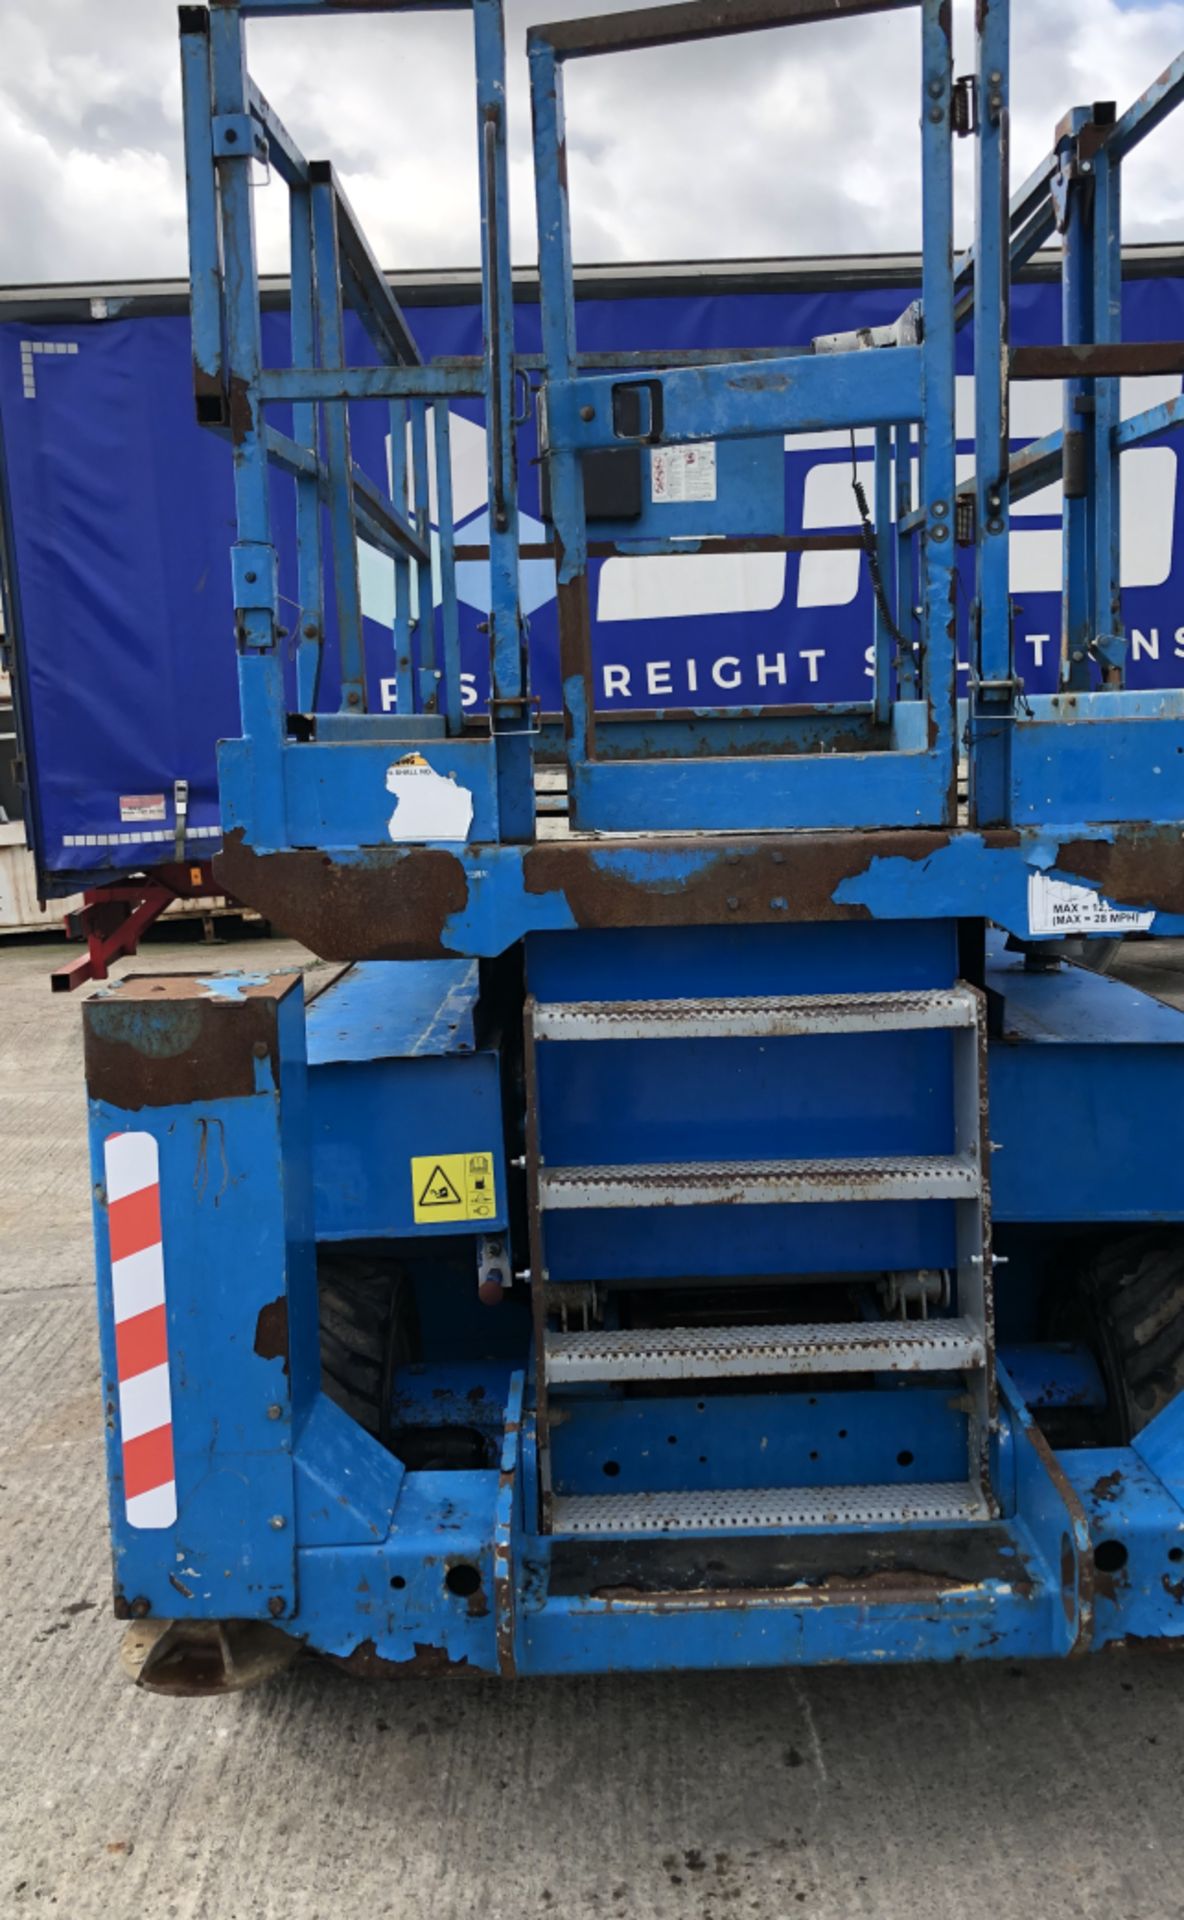 4×4 SIZZLER LIFT | 10M LIFT 2008 GENIE GS 2668 RT - Image 12 of 15